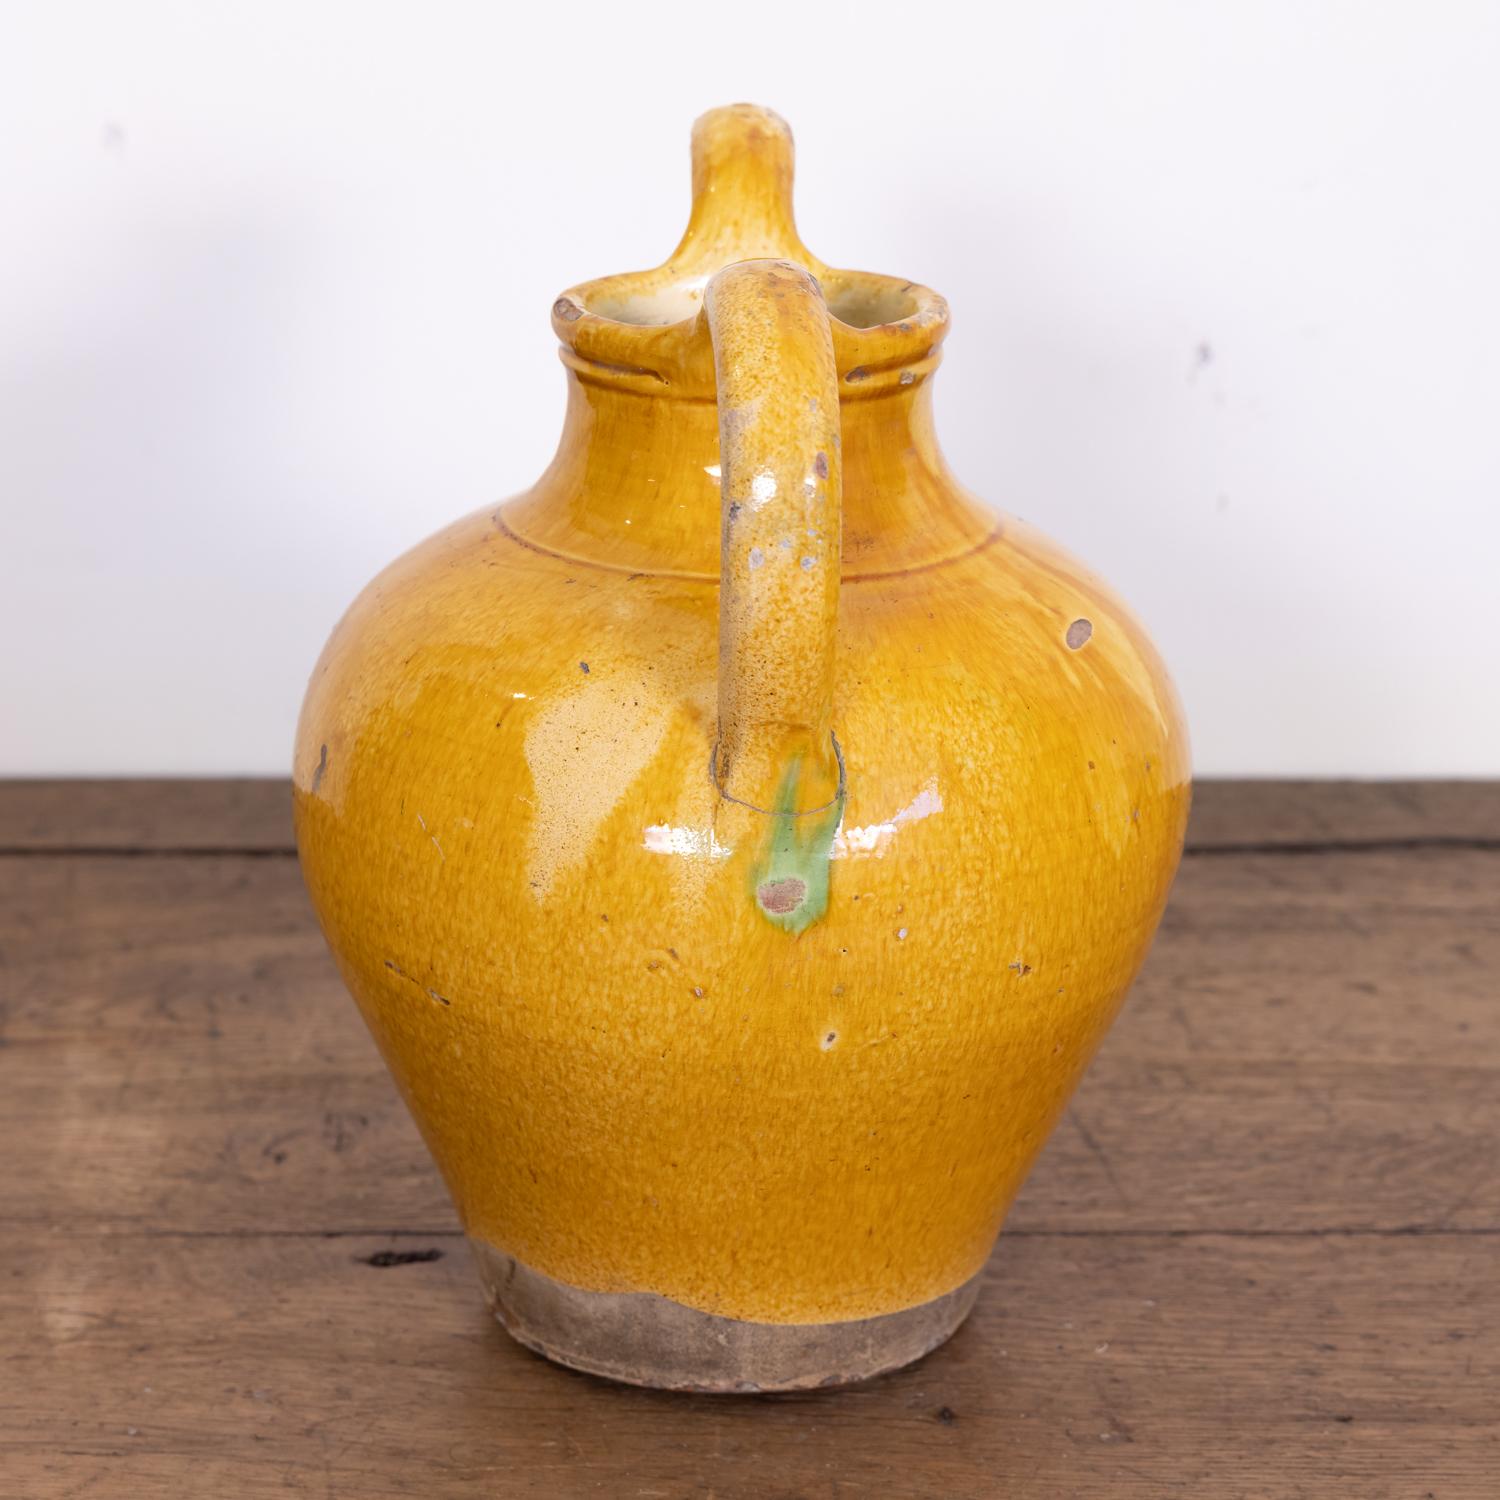 Glazed Large 19th Century French Cruche Orjol or Water Jug with Yellow Glaze